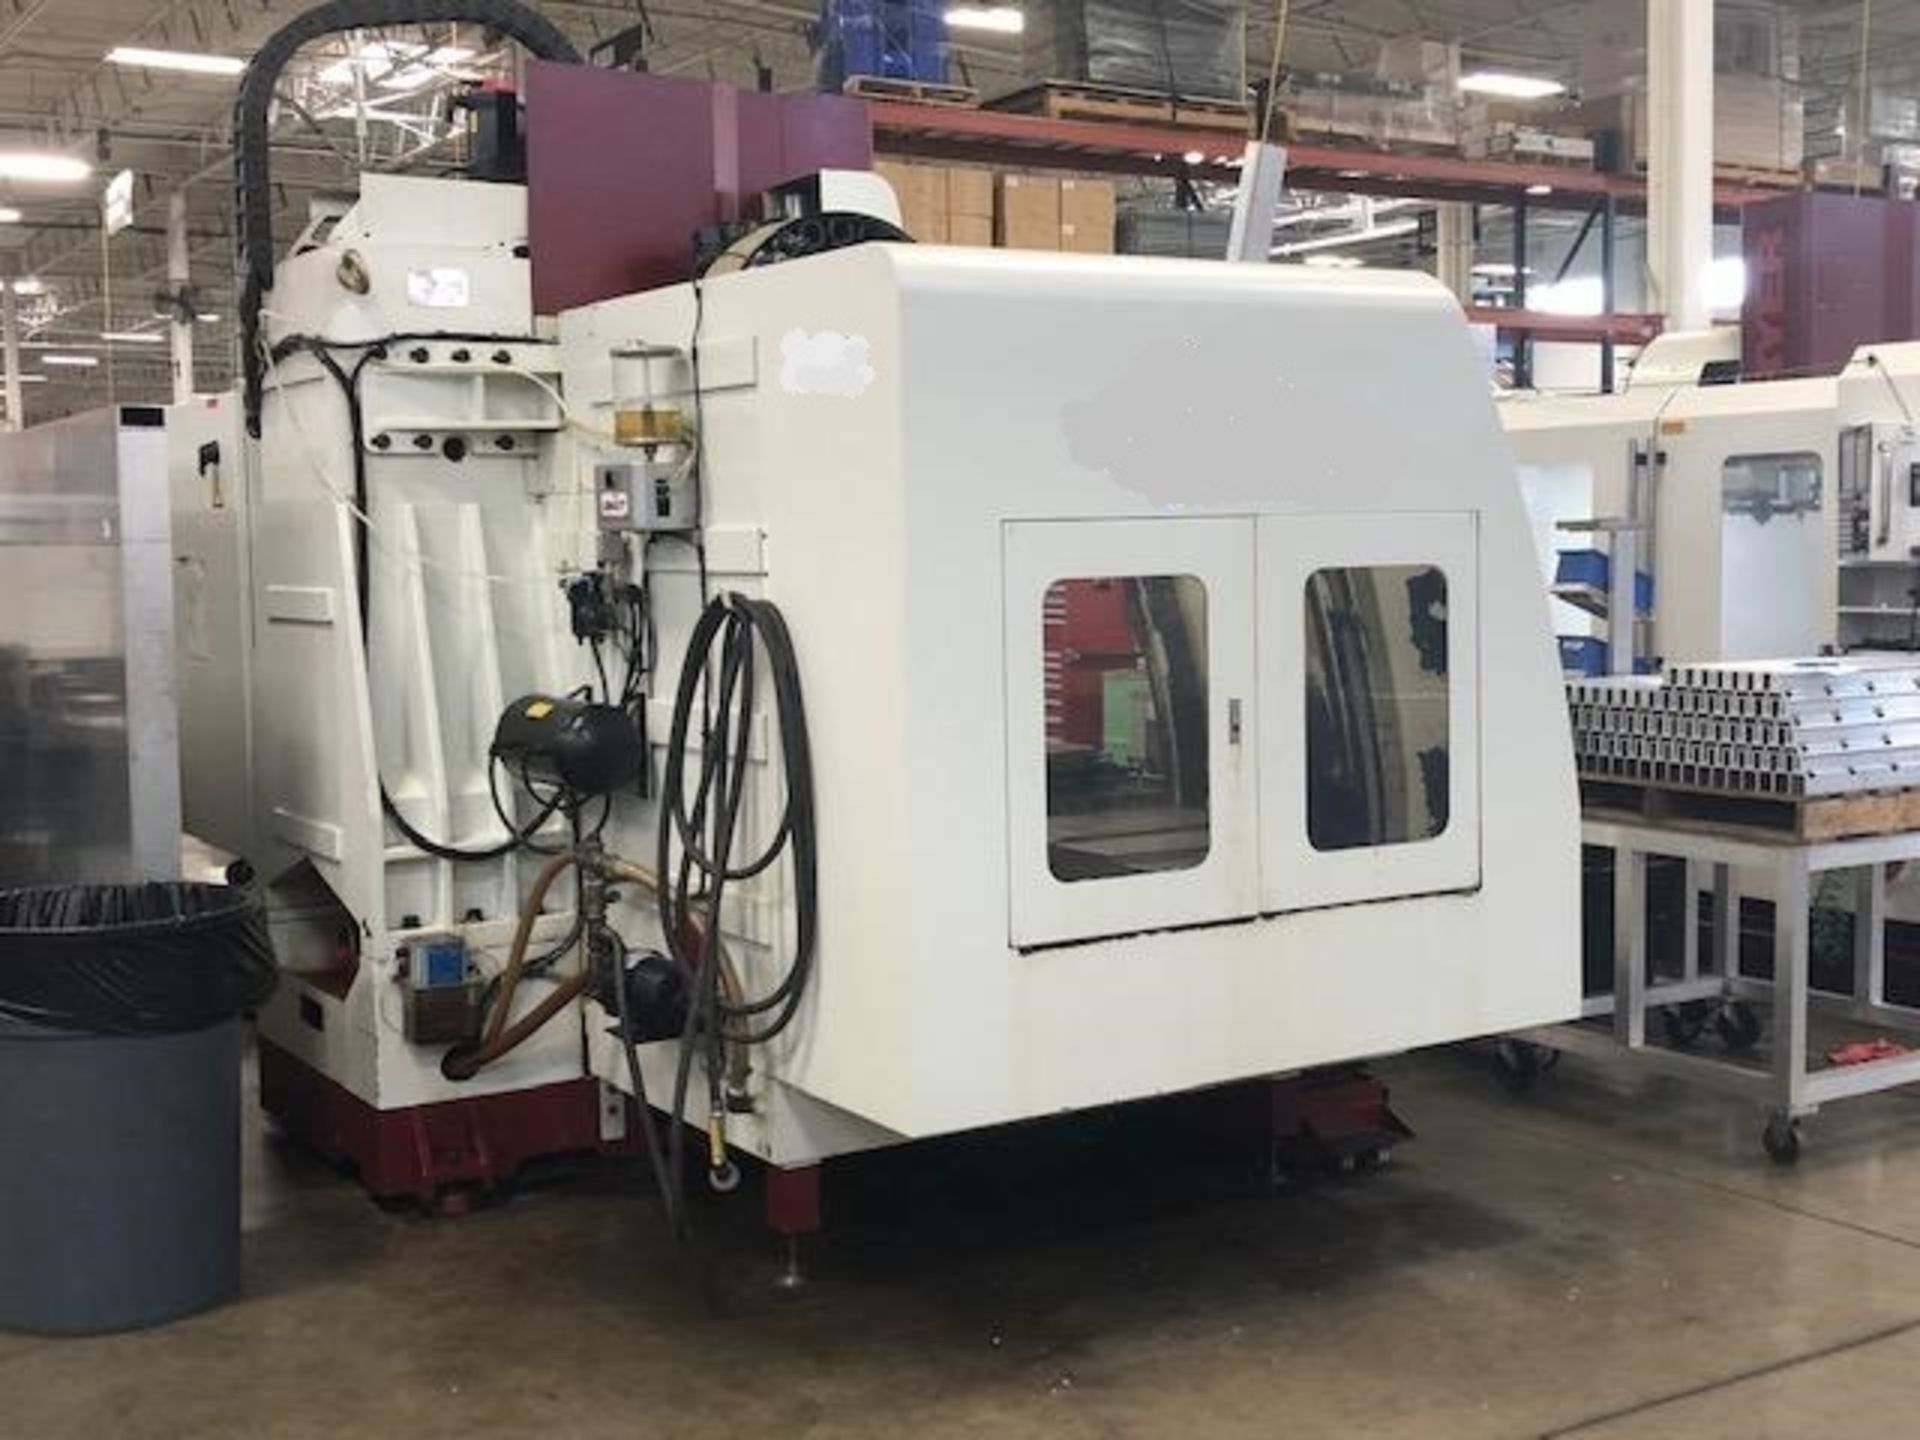 Fryer MC60 3-Axis CNC Vertical Machining Center, S/N 60656, New 2009 - Image 7 of 8